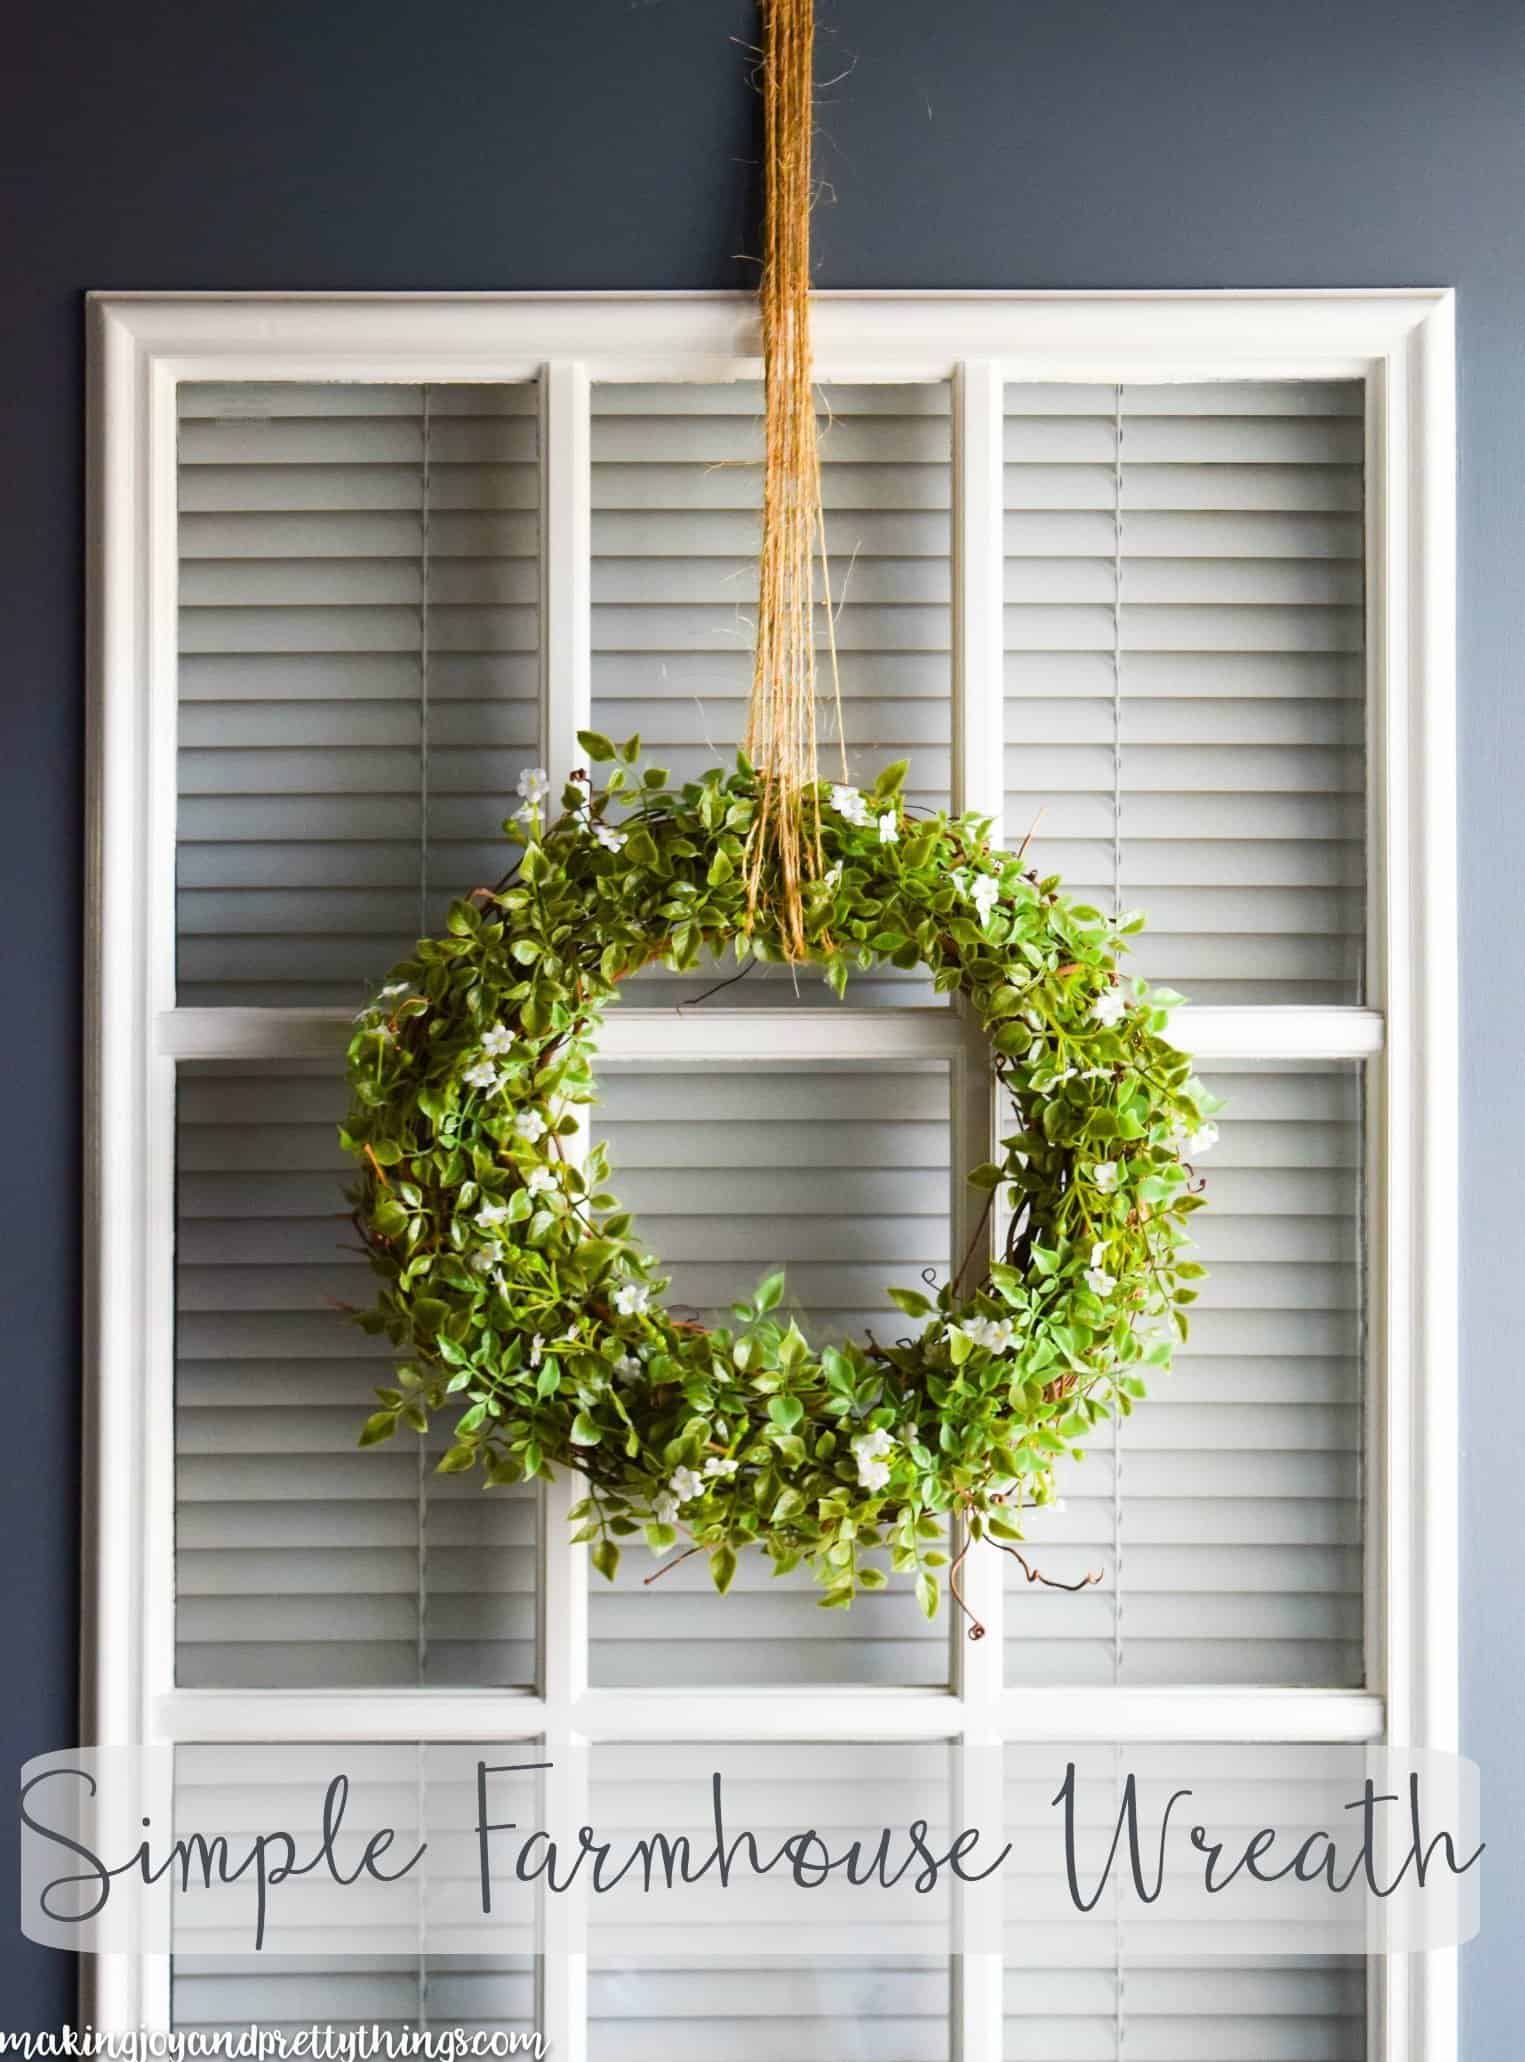 This simple farmhouse wreath is an easy DIY to add fixer upper and farmhouse style to your home. Easy to make and has a beautifully simple finish. Bring the farmhouse style home decor into your home